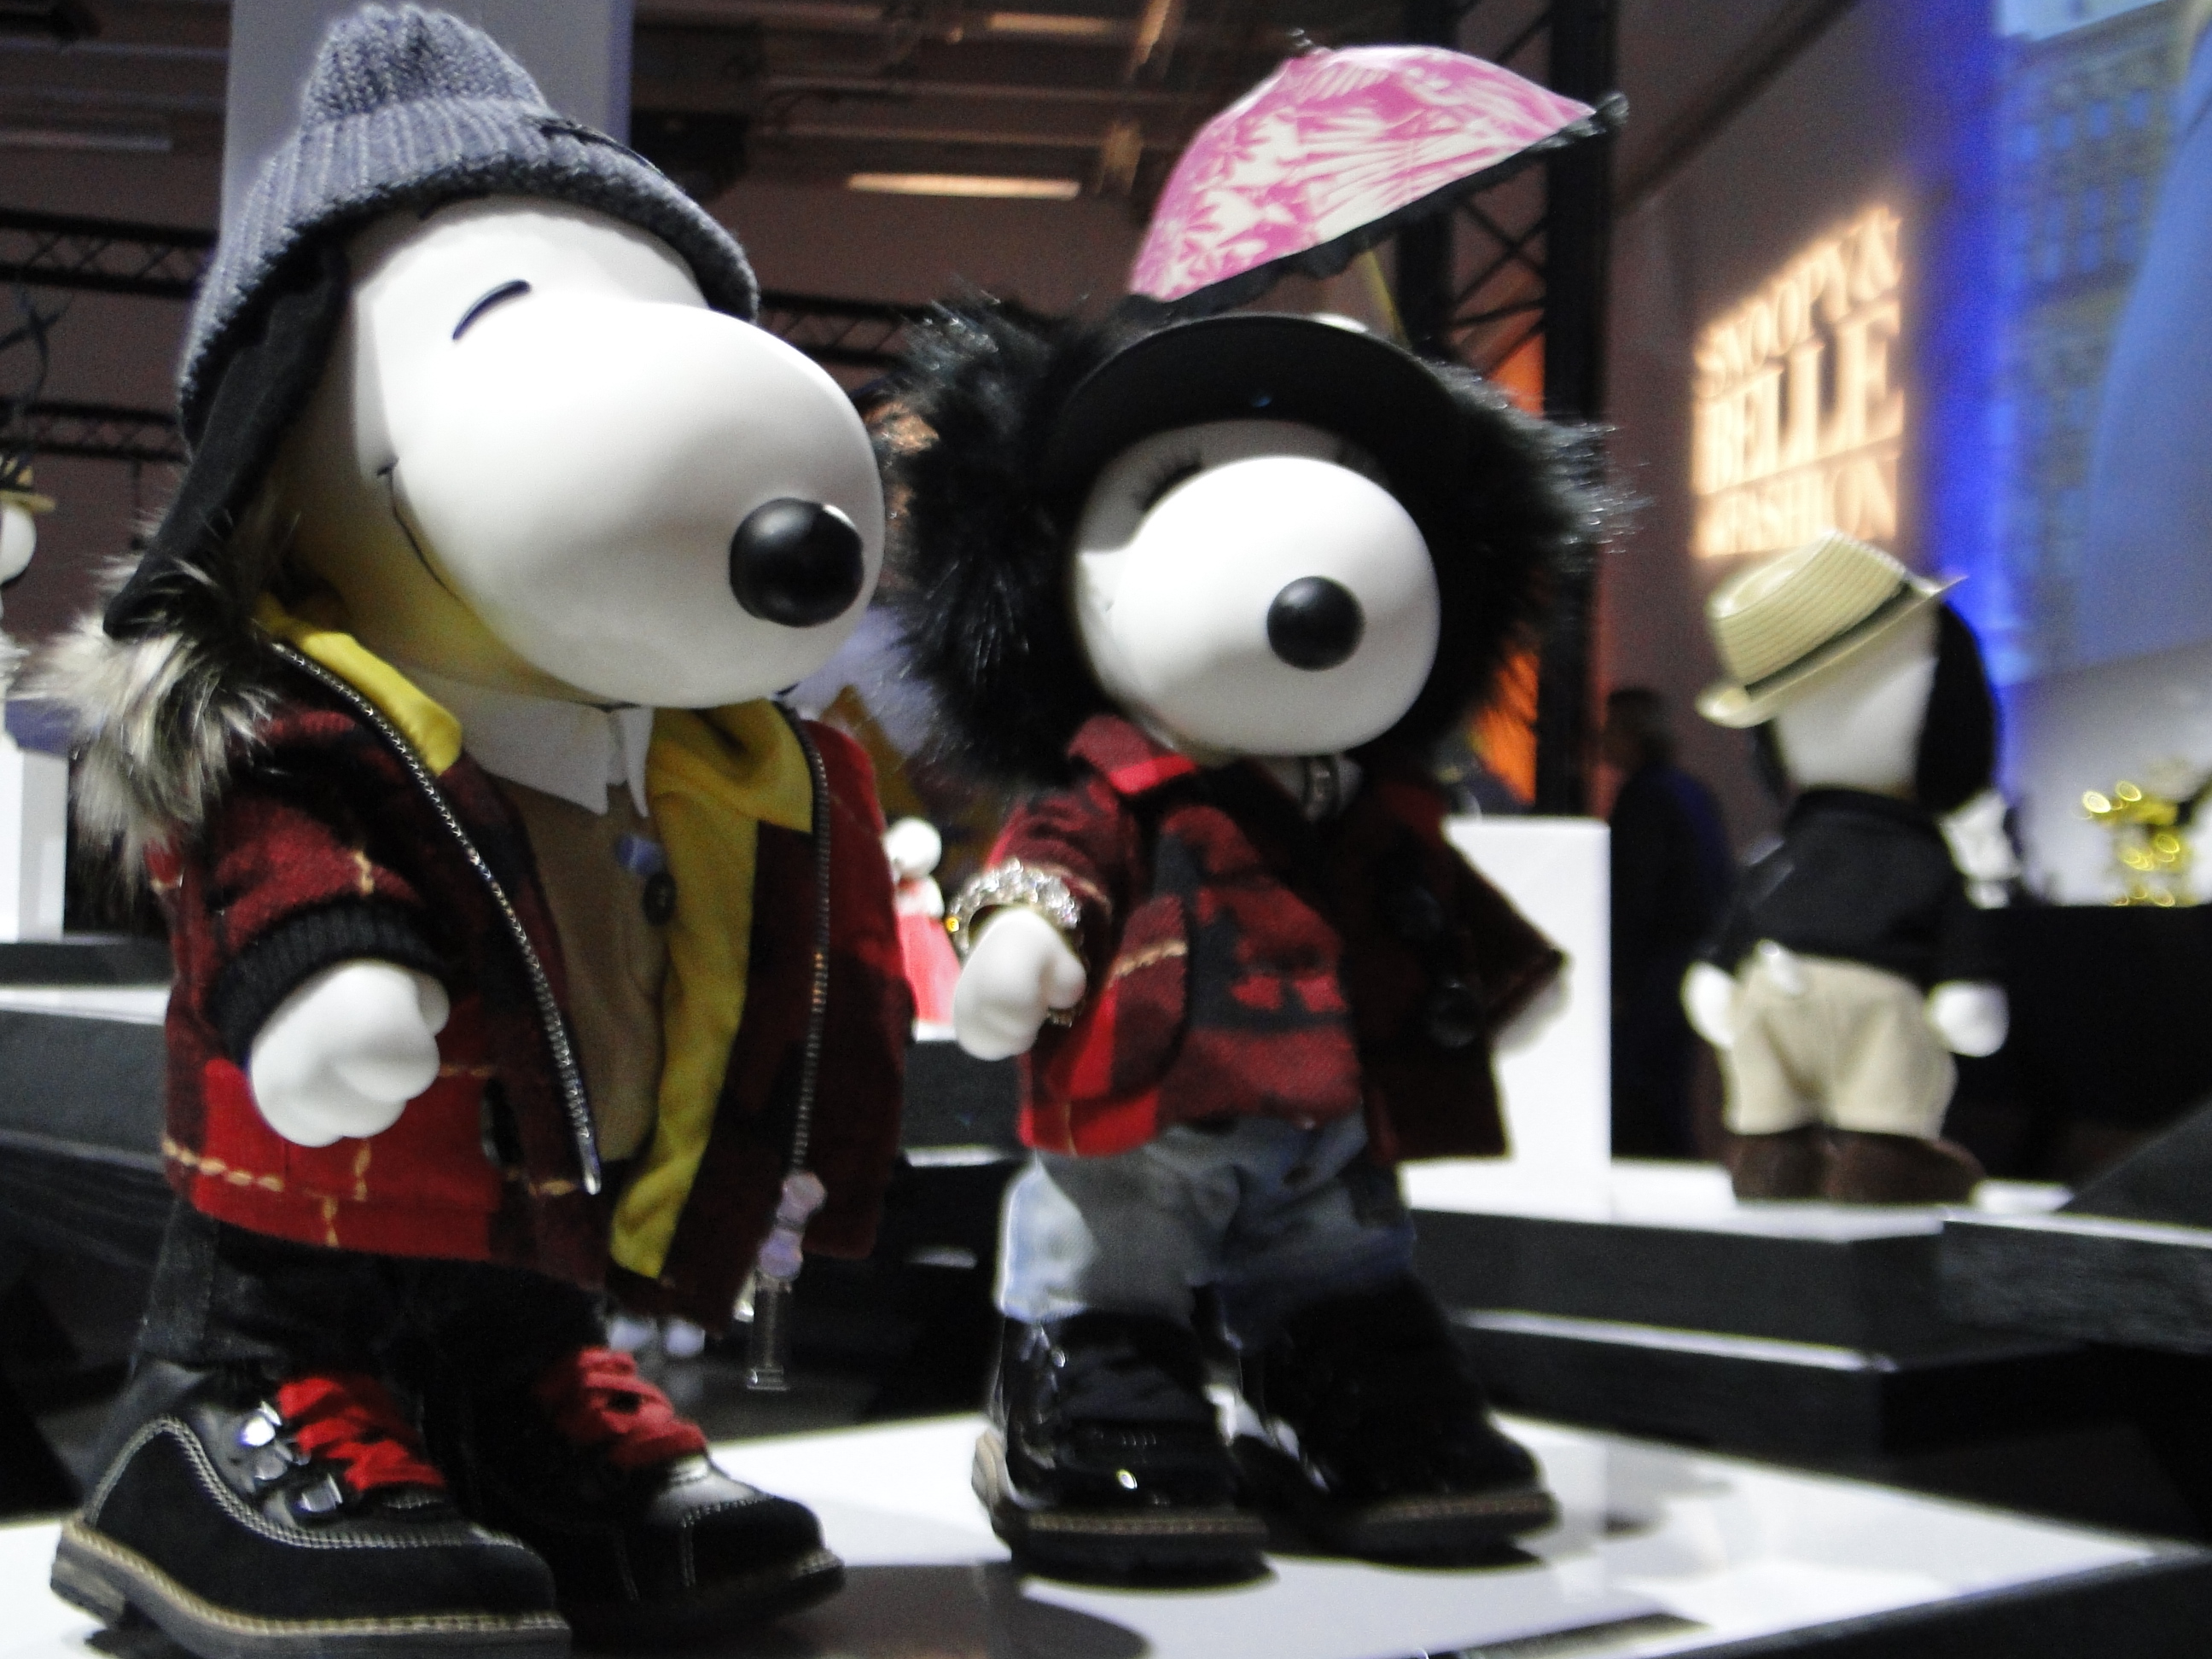 SNOOPY AND BELE IN FASHION Paris France Exhibition Exposition - Palais de Tokyo - copyright Go with the Blog DSC06440